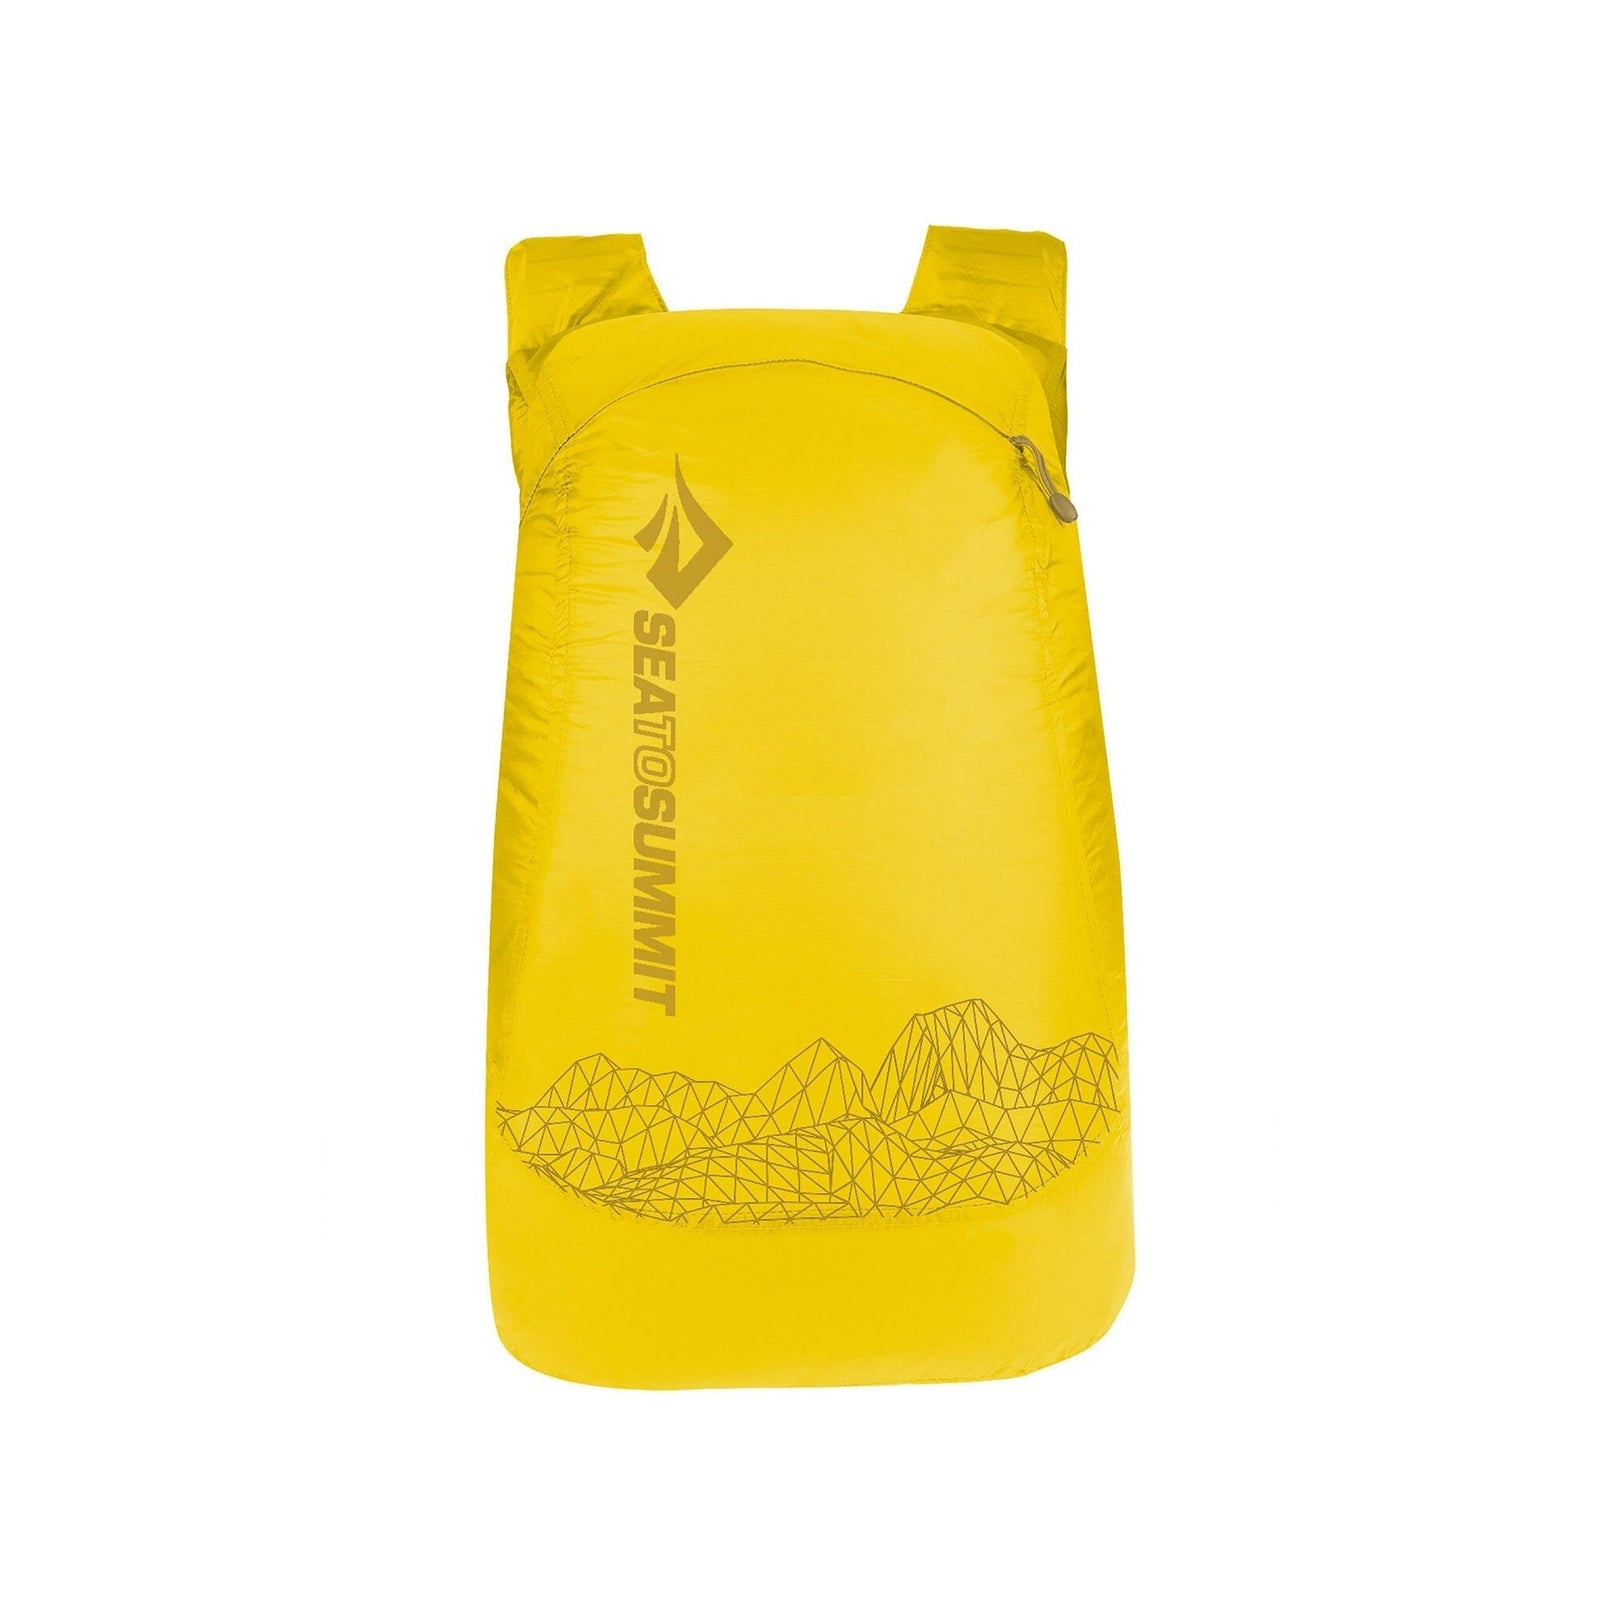 Sea to Summit Ultra-Sil Nano Day Pack Yellow 18 litre 